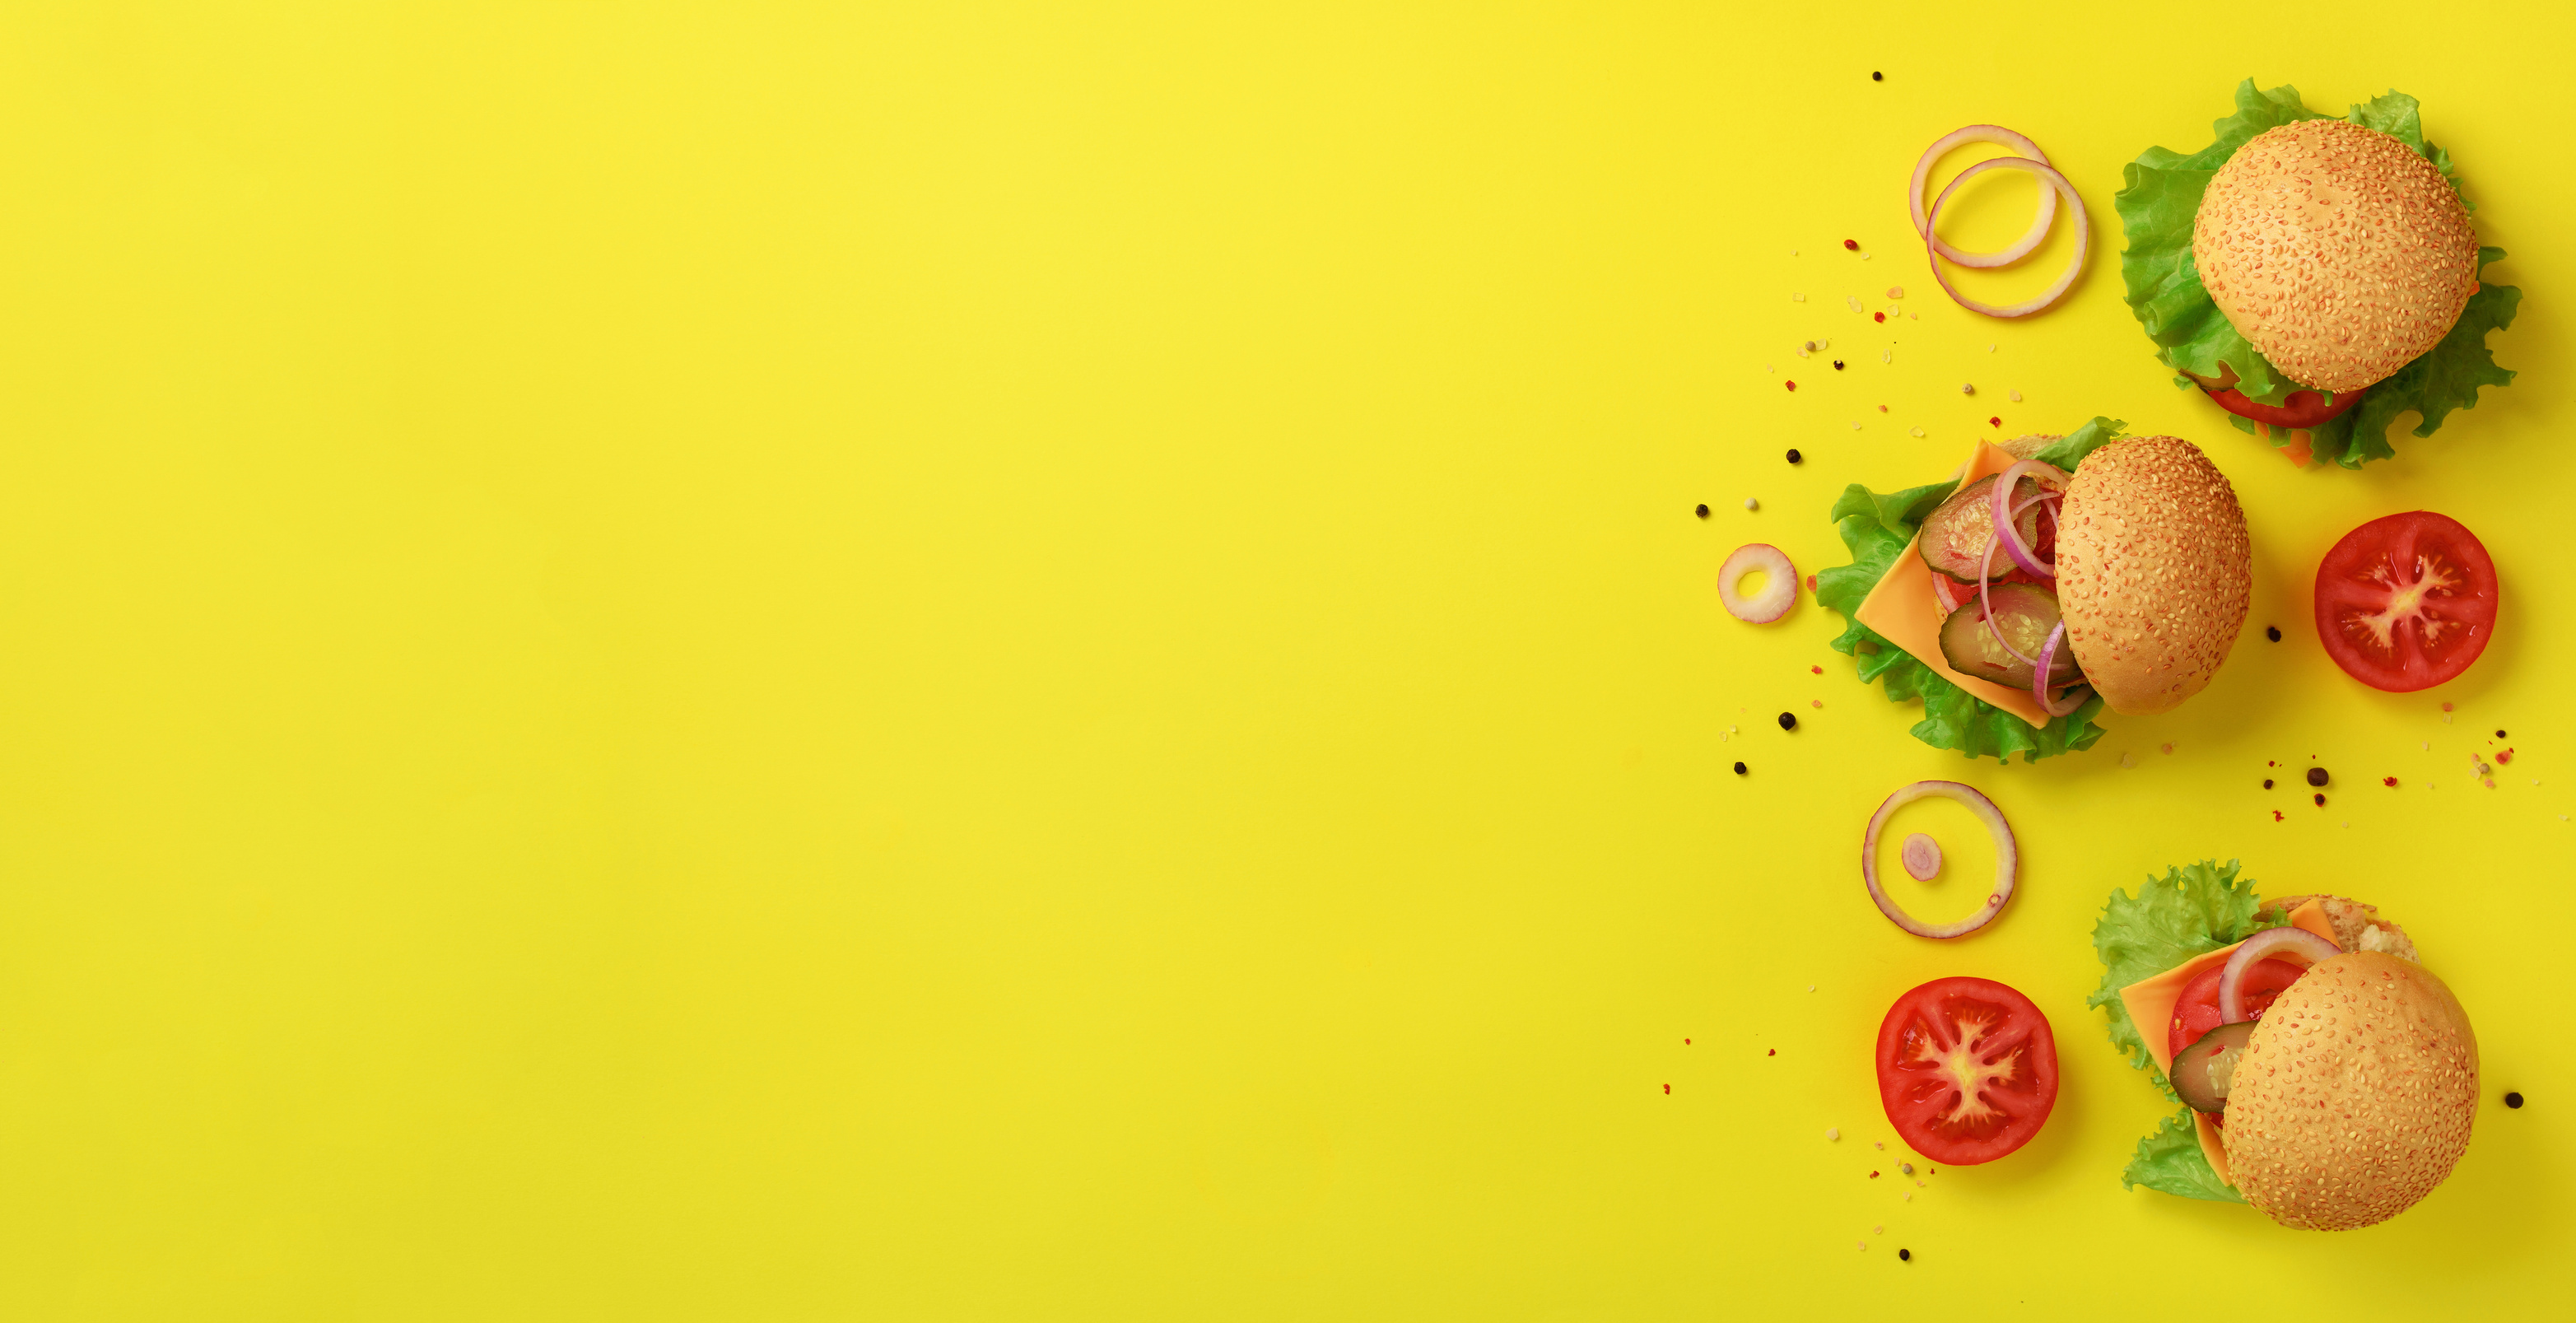 Fast Food, Unhealthy Diet Concept. Juicy Homemade Burgers, Tomatoes, Cheese, Onion, Cucumber and Lettuce on Yellow Background. Top View. Banner with Copy Space.